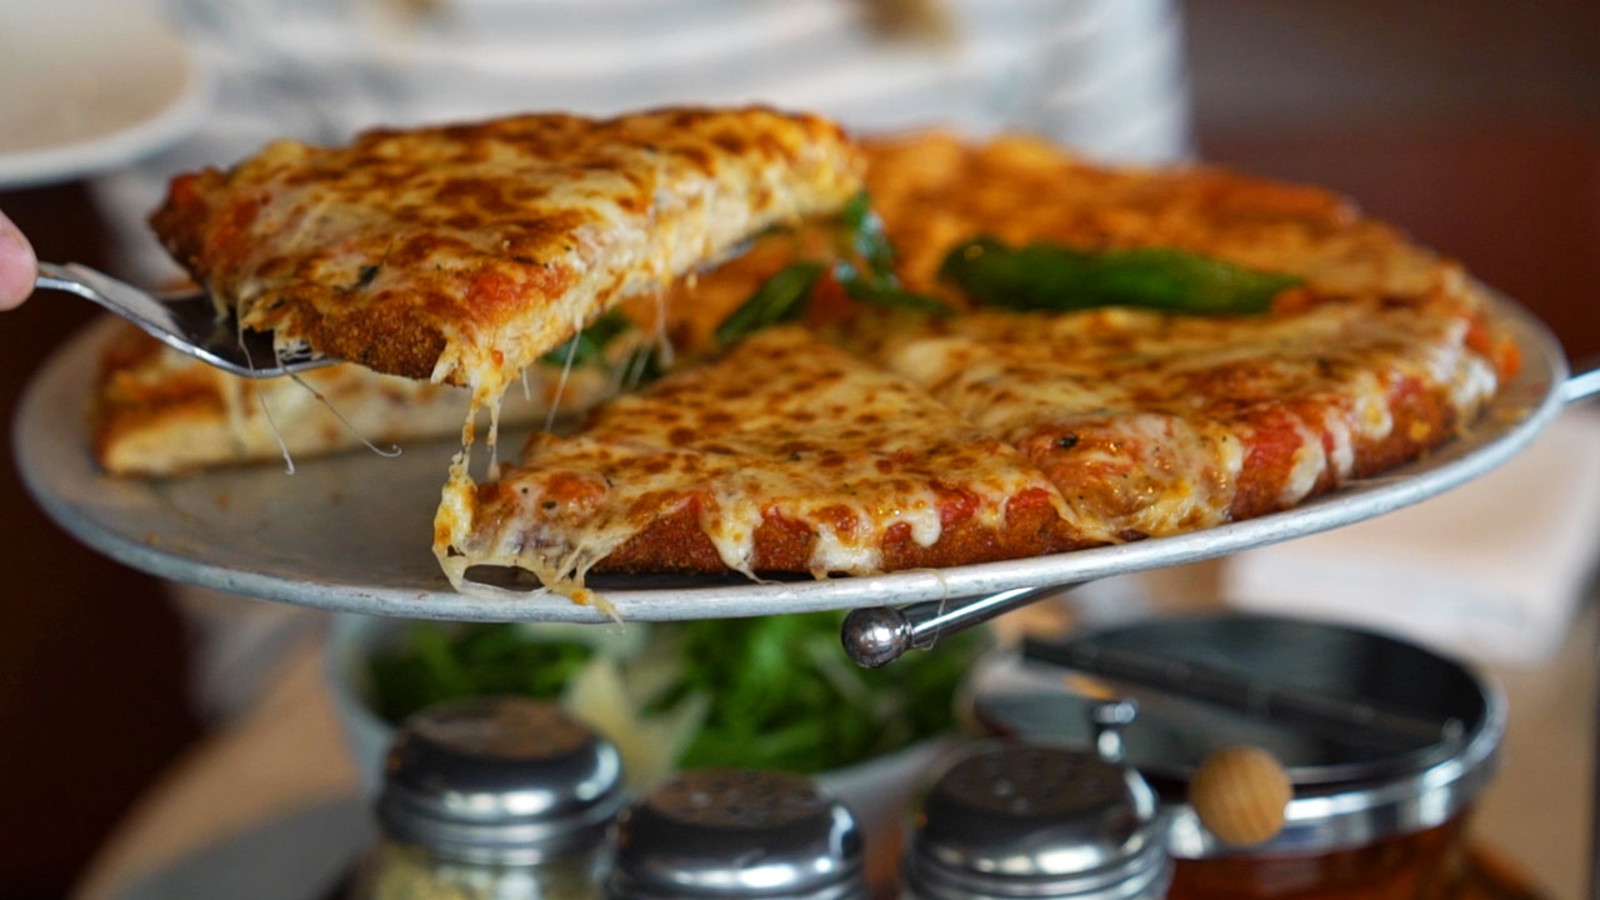 Quality Italian Chicken Parm Pizza Luxury Chicken Parm Pizza at Quality Italian In New York City is